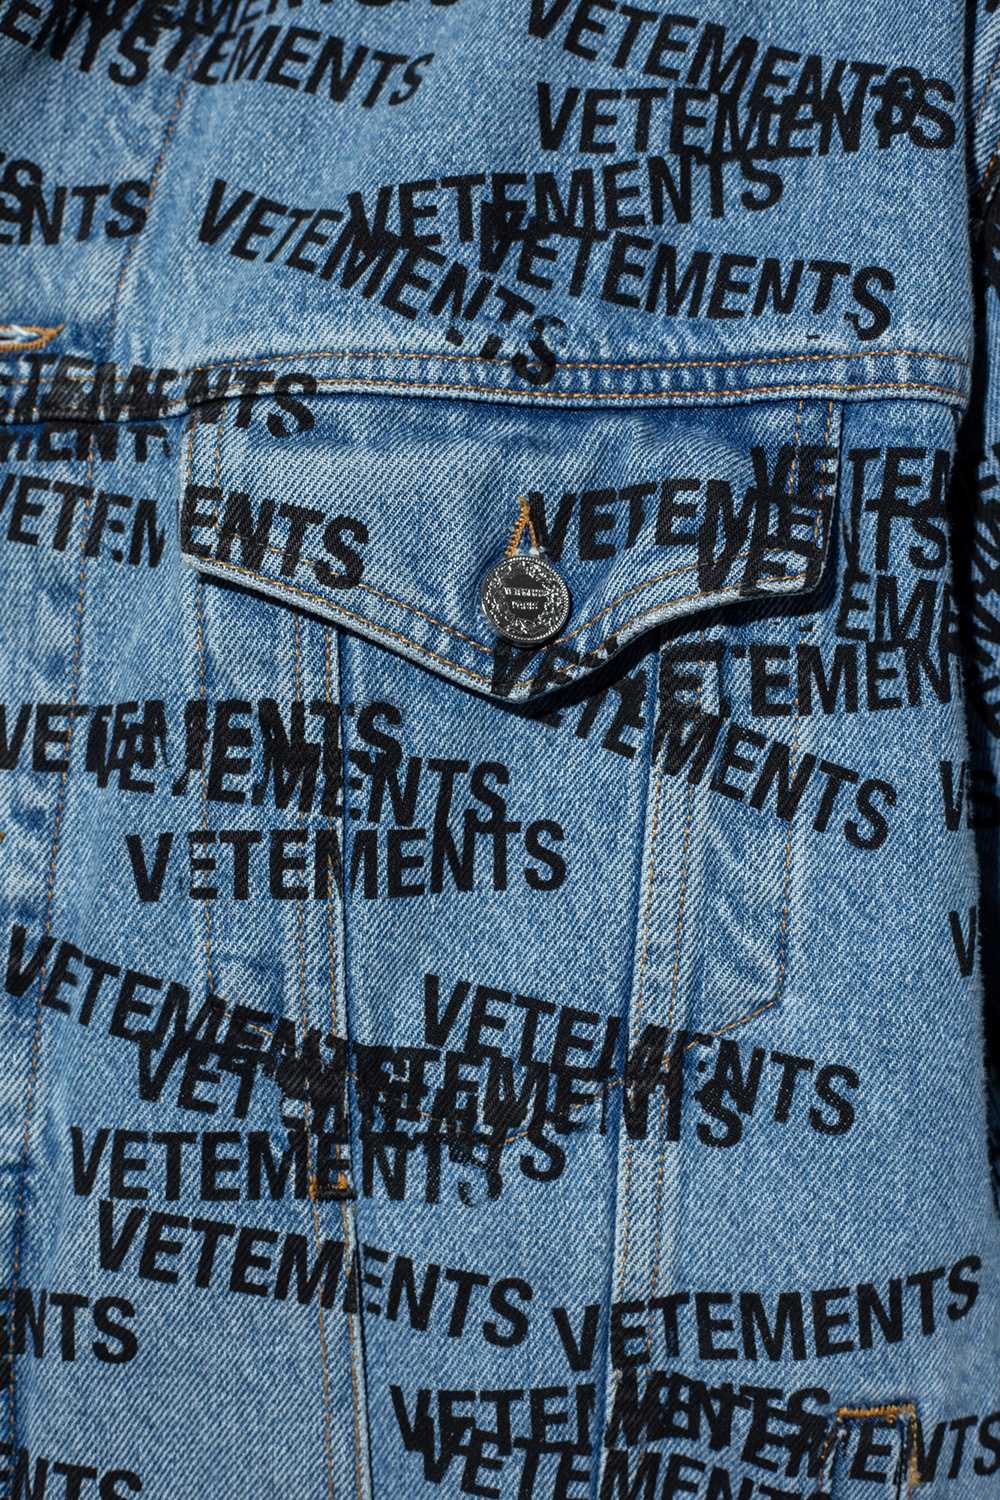 VETEMENTS the ™ Robbiee Shirt elevates your look perfectly